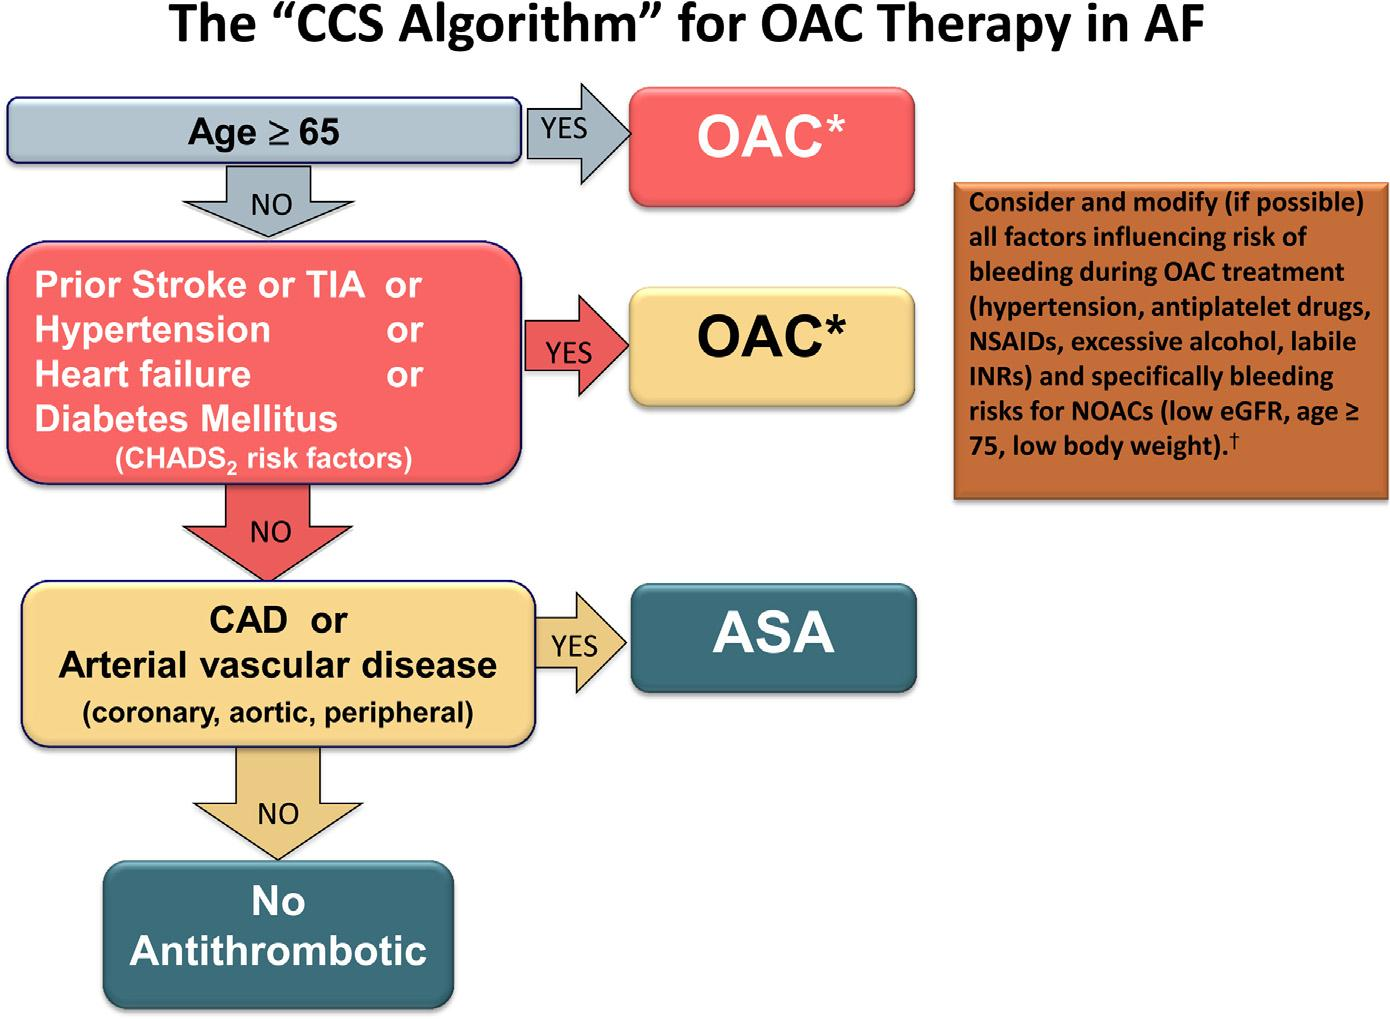 We recommend that when OAC therapy is indicated for patients with nonvalvular AF, most patients should receive dabigatran, rivaroxaban, apixaban, or